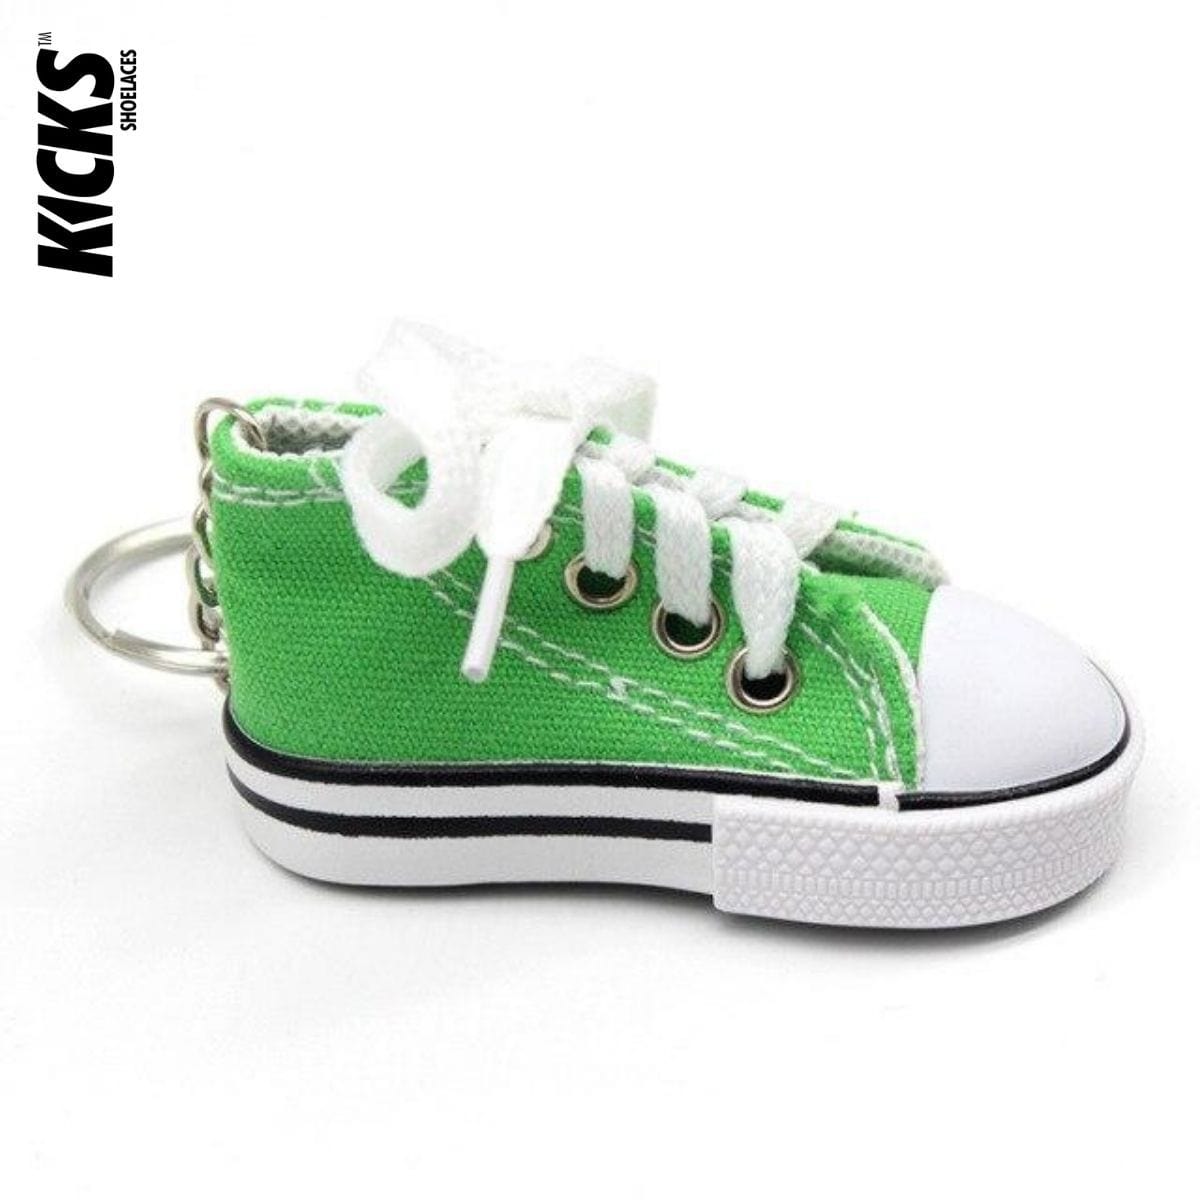 green-high-top-sneaker-keychain-perfect-gift-best-charm-accessories